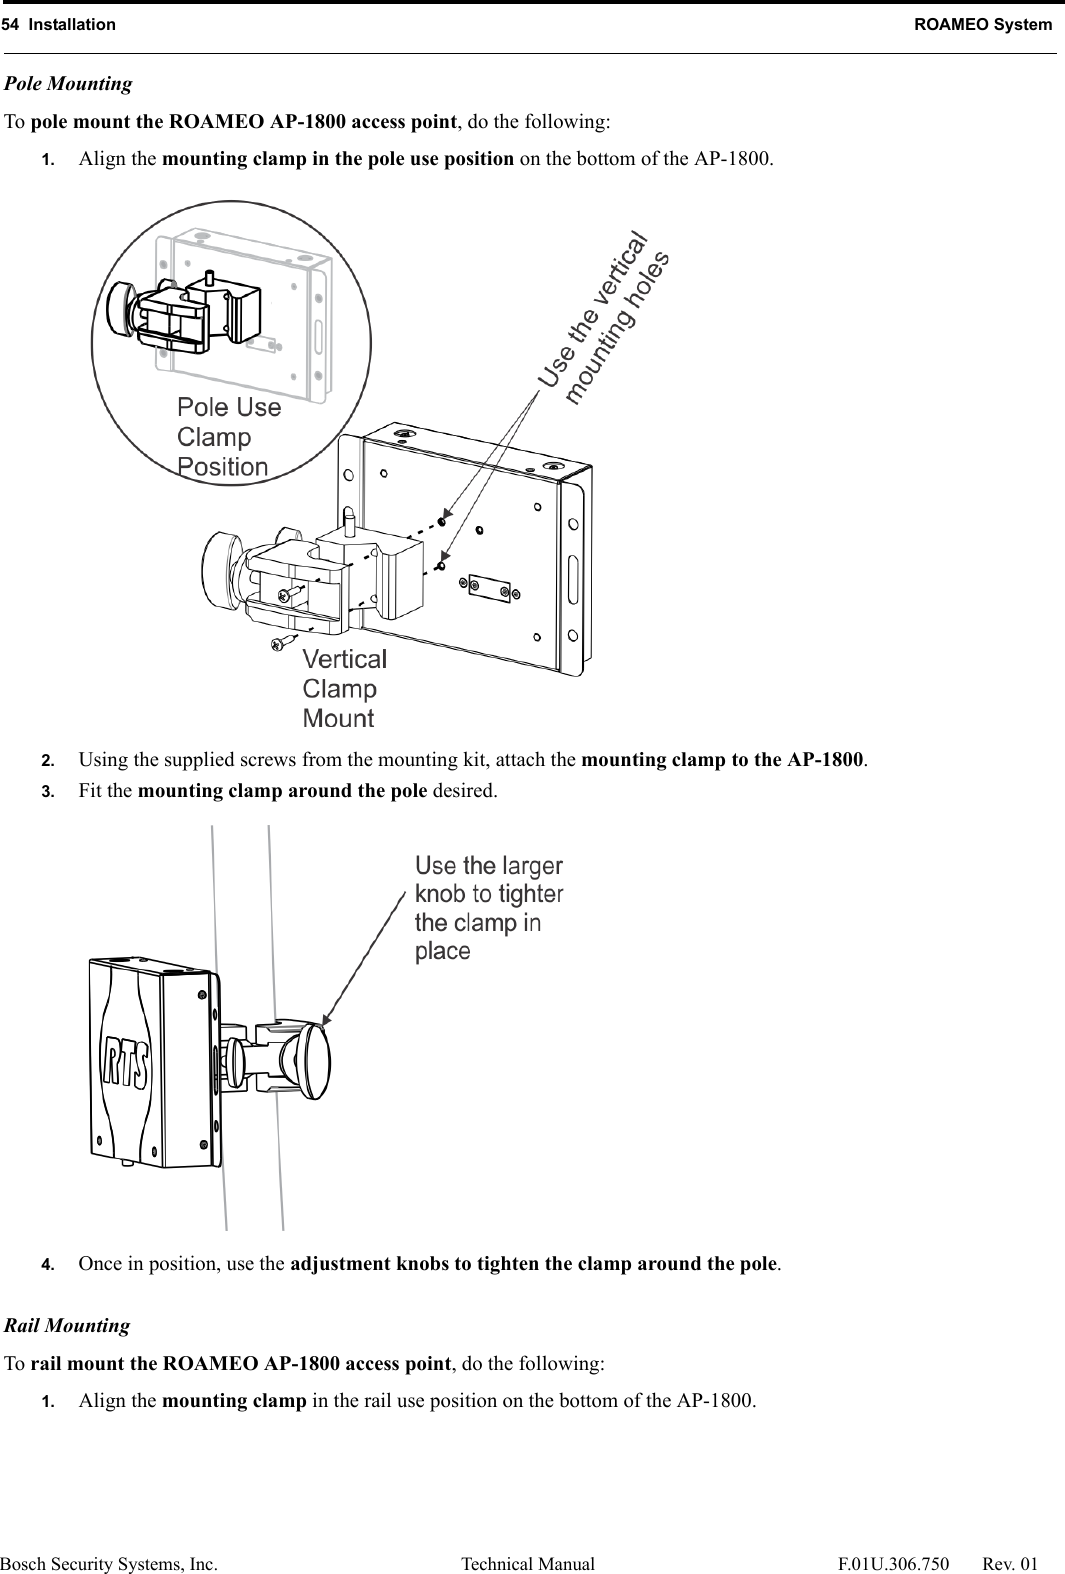 54  Installation ROAMEO SystemBosch Security Systems, Inc. Technical Manual  F.01U.306.750 Rev. 01Pole Mounting To pole mount the ROAMEO AP-1800 access point, do the following: 1. Align the mounting clamp in the pole use position on the bottom of the AP-1800. 2. Using the supplied screws from the mounting kit, attach the mounting clamp to the AP-1800. 3. Fit the mounting clamp around the pole desired. 4. Once in position, use the adjustment knobs to tighten the clamp around the pole.  Rail Mounting To rail mount the ROAMEO AP-1800 access point, do the following: 1. Align the mounting clamp in the rail use position on the bottom of the AP-1800. 